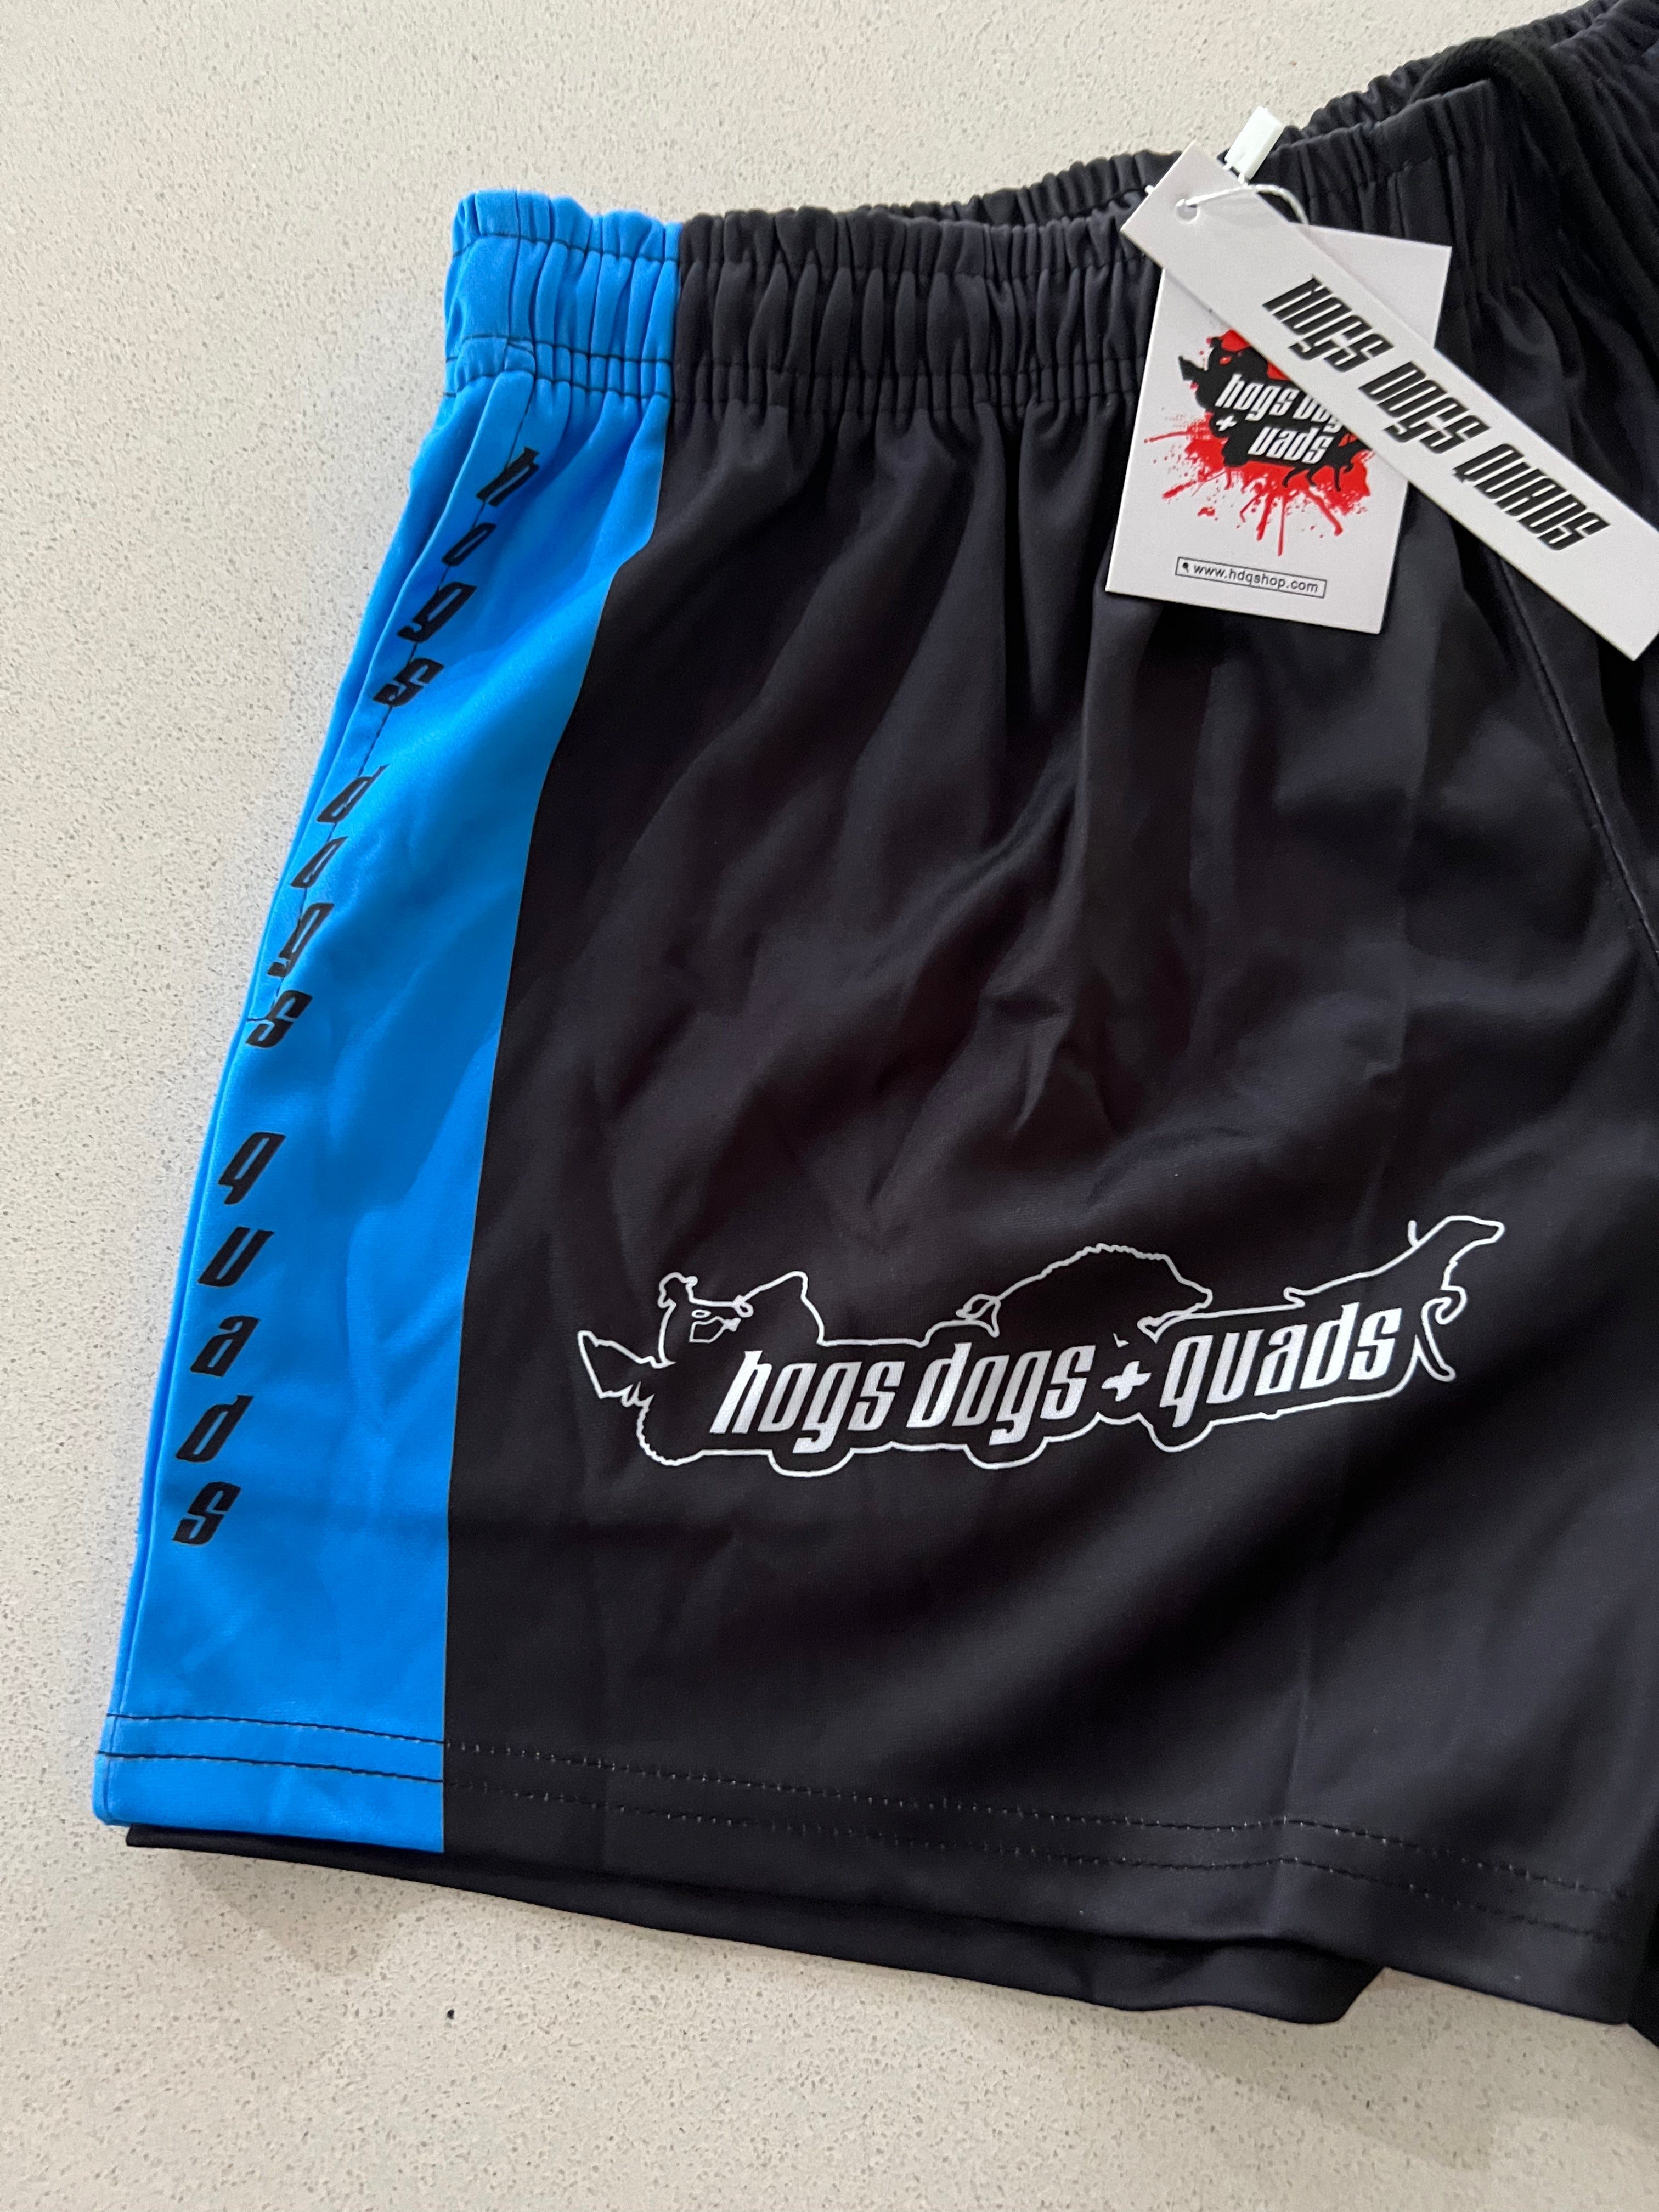 🔥NEW🔥 Buggy Rig Footy Shorts - WITH POCKETS - Hogs Dogs Quads Shop